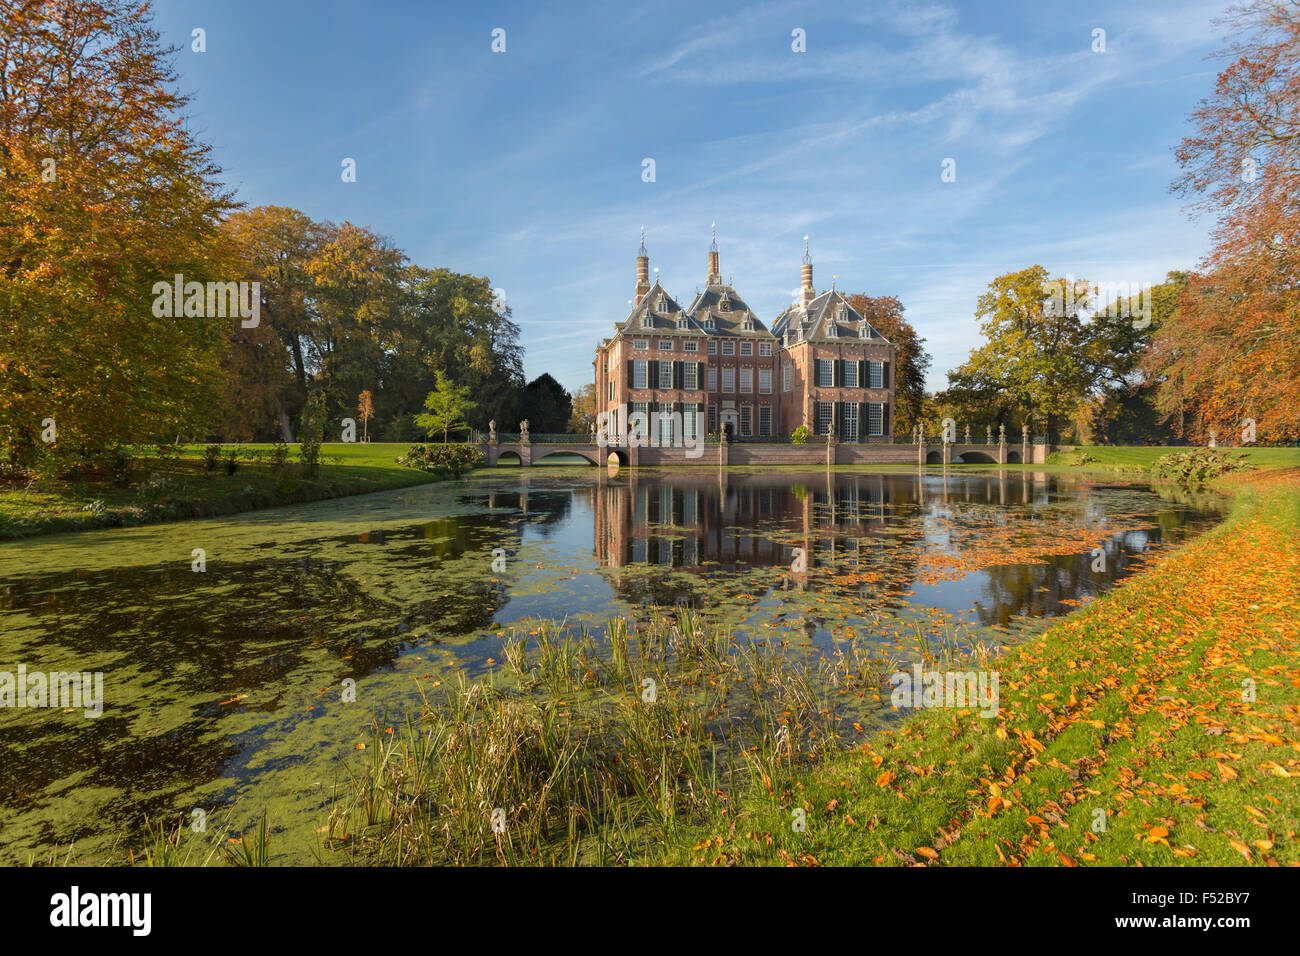 Fall colors at Duivenvoorde Castle, Voorschoten, South Holland, The Netherlands. Build in 1631 with an English landscape park. Stock Photo